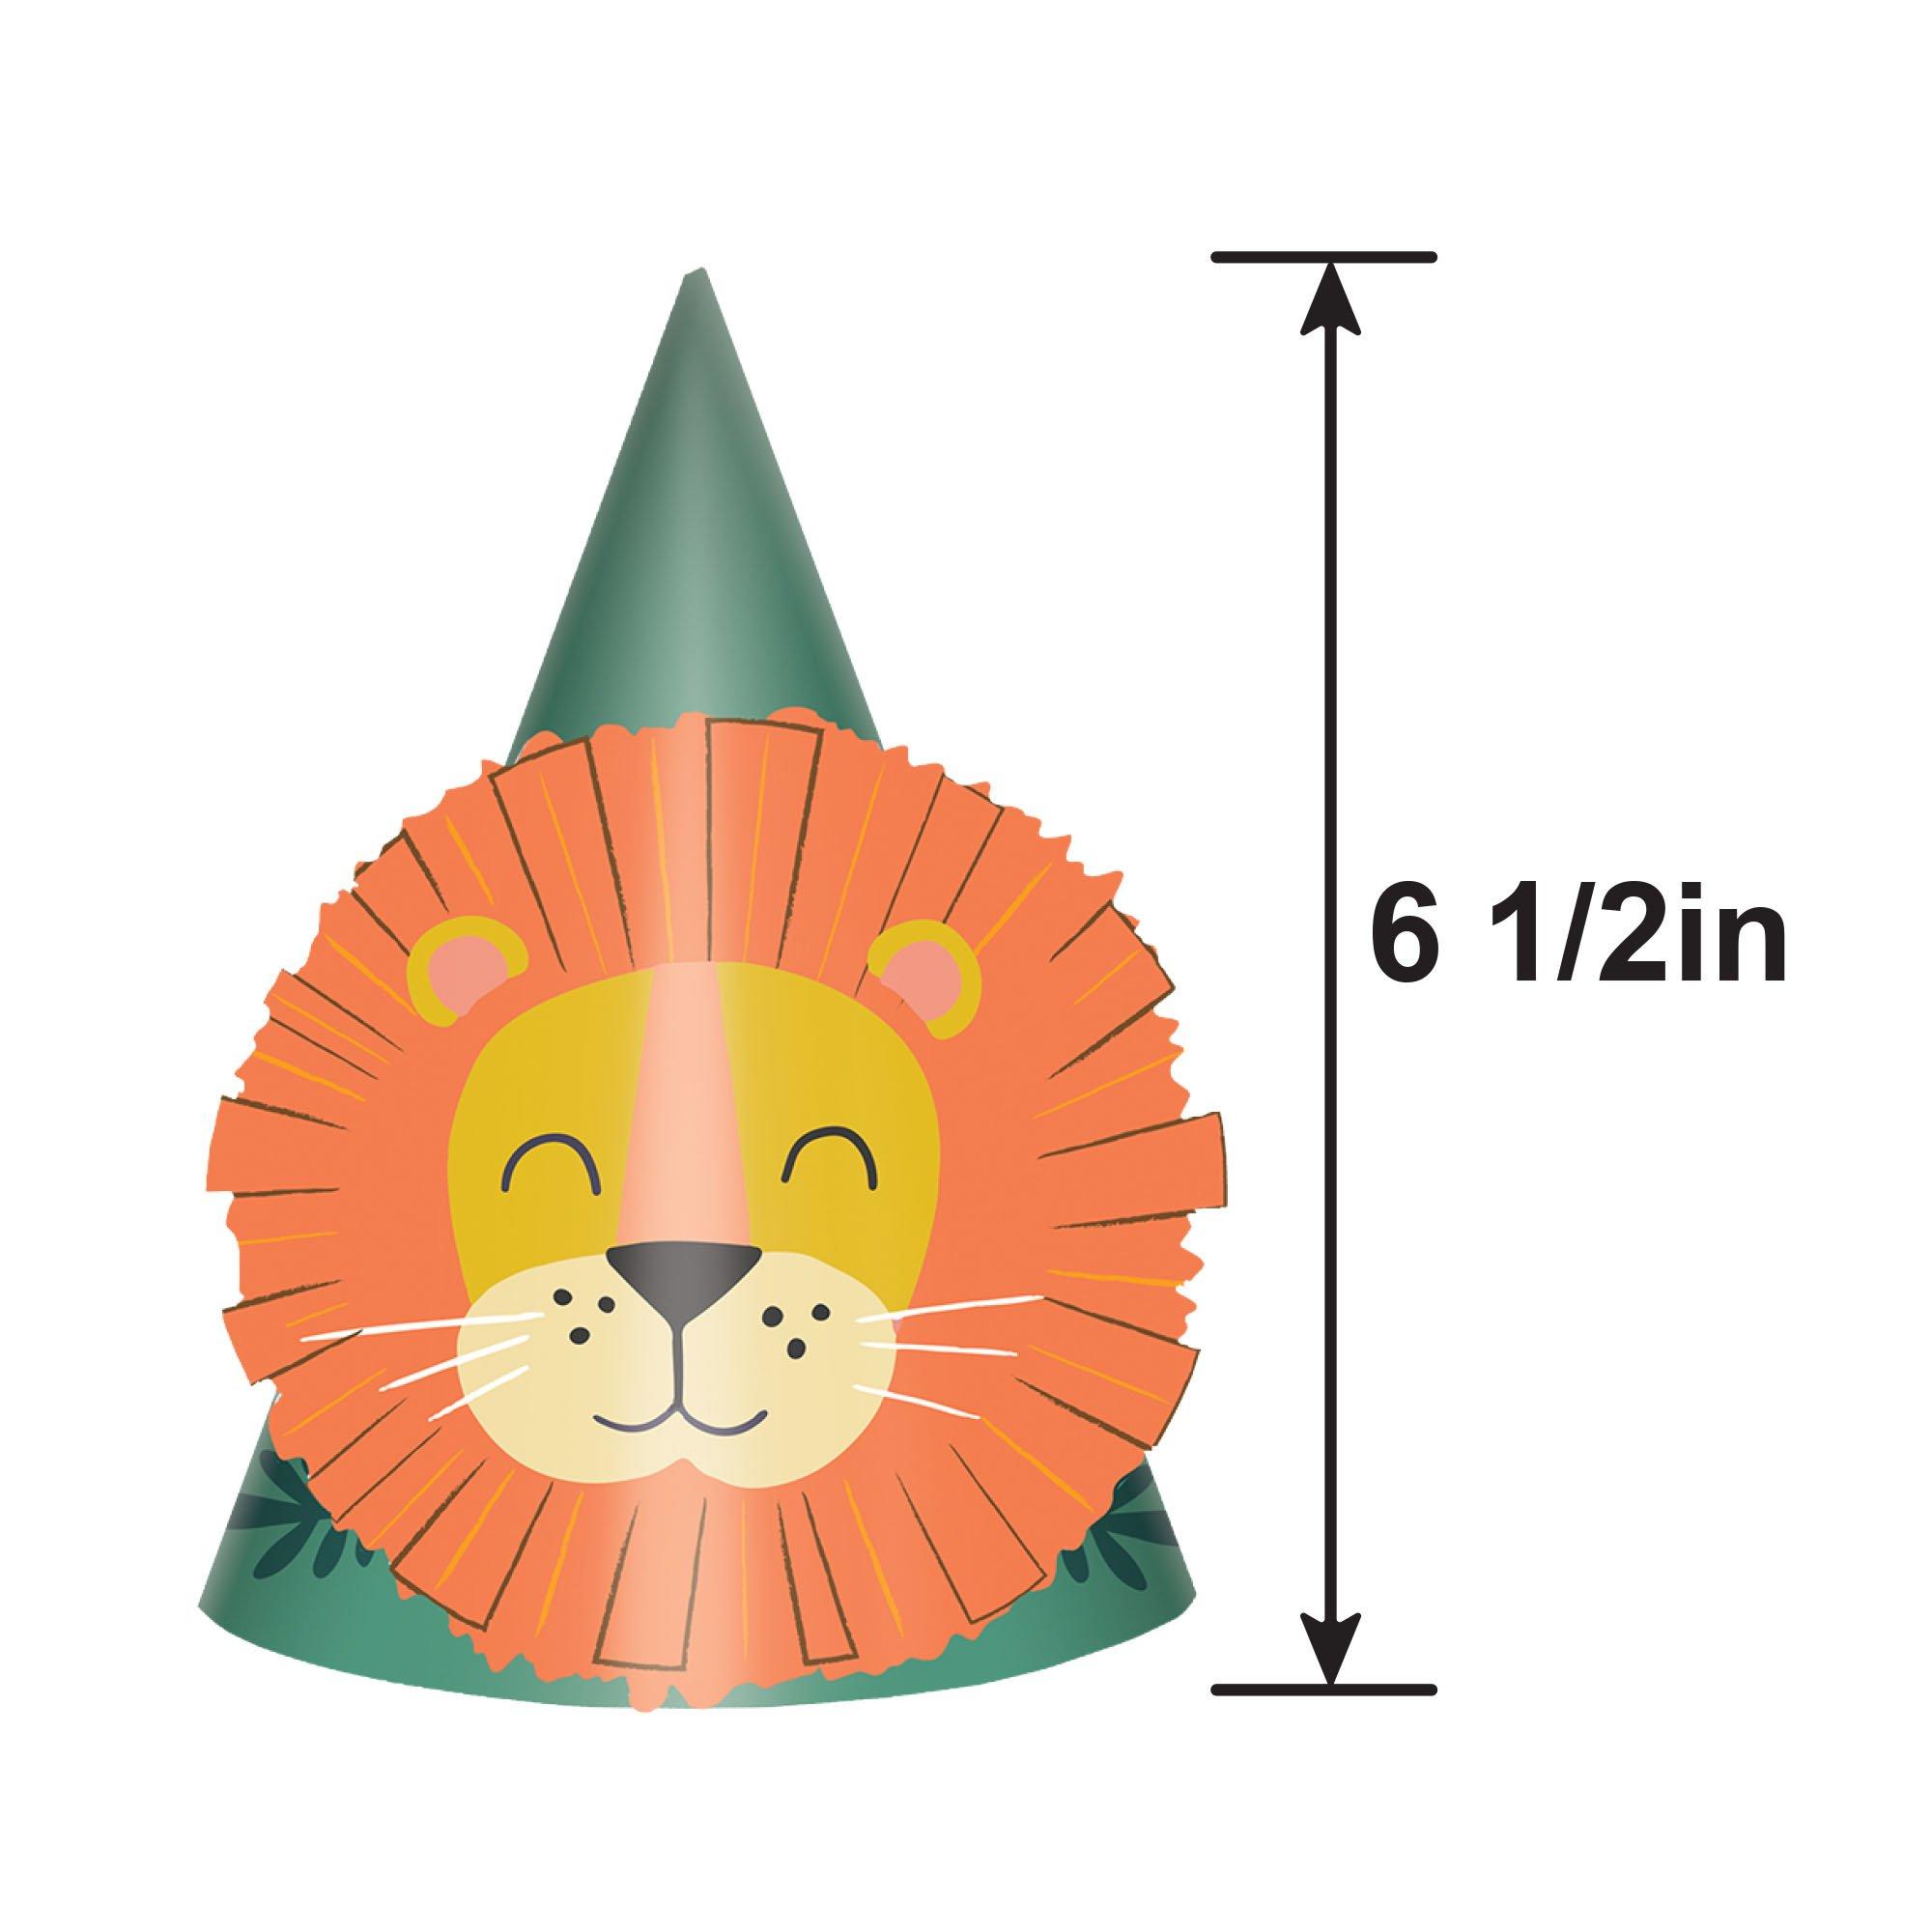 Get Wild Jungle Cardstock Party Hats, 6.4in, 8ct